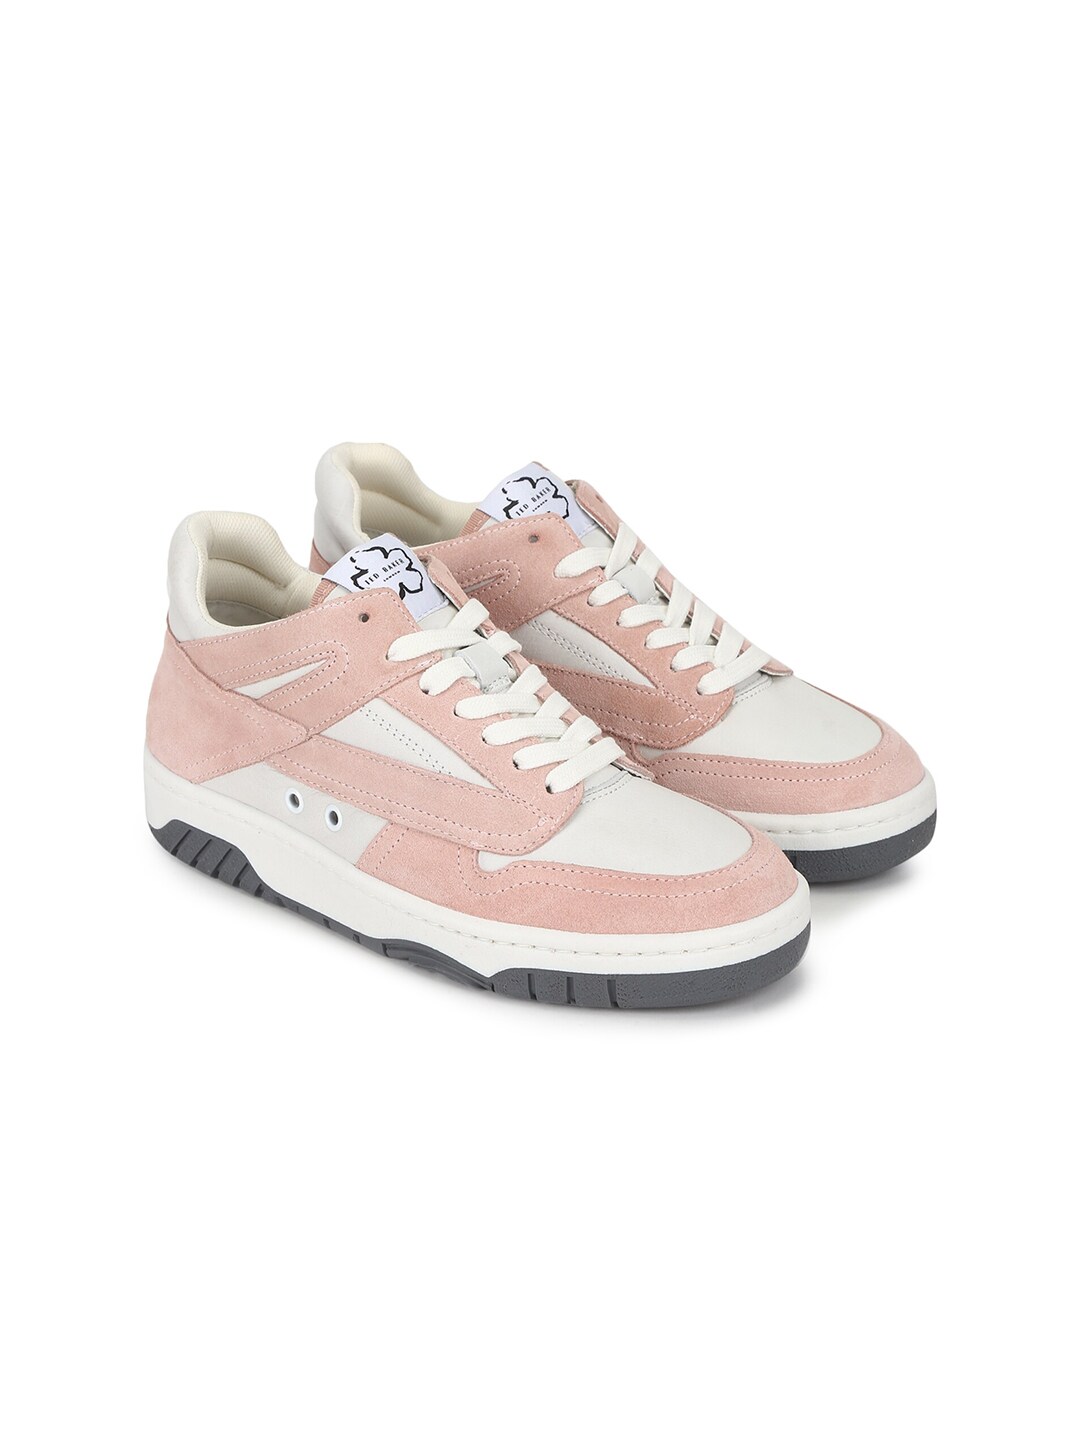 Ted Baker Women Pink Colourblocked Leather Sneakers Price in India